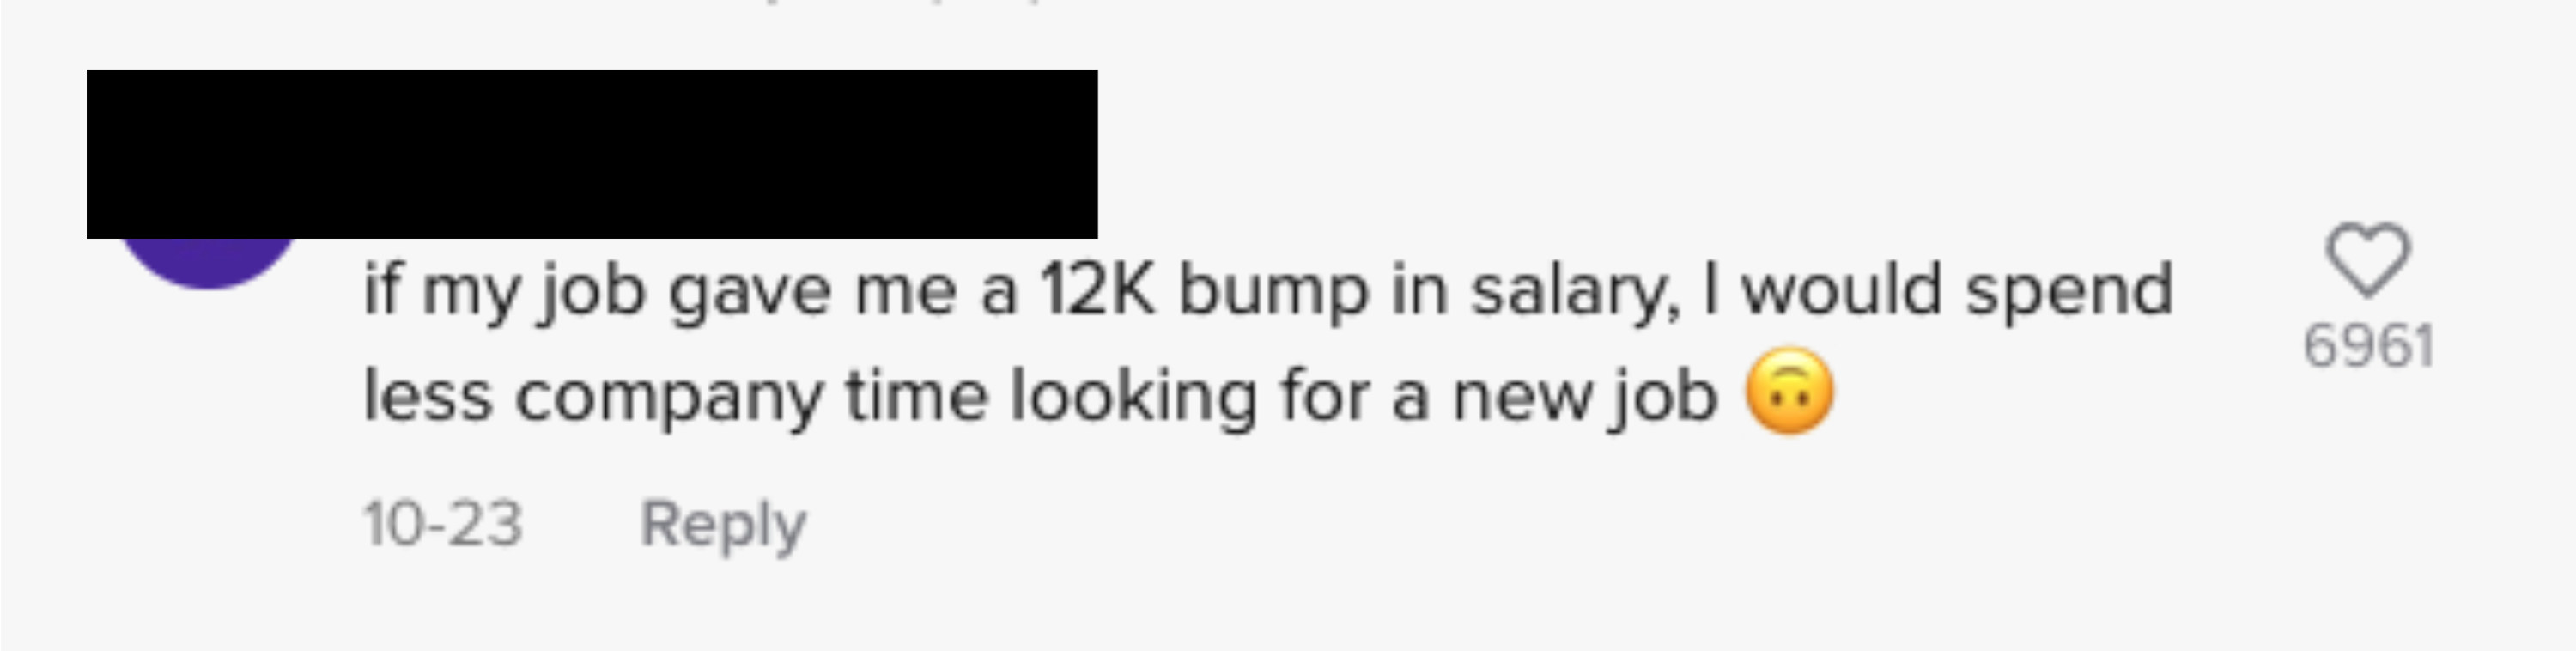 text: if my job gave me a 12k bump in salary, i would spend less company time looking for a job